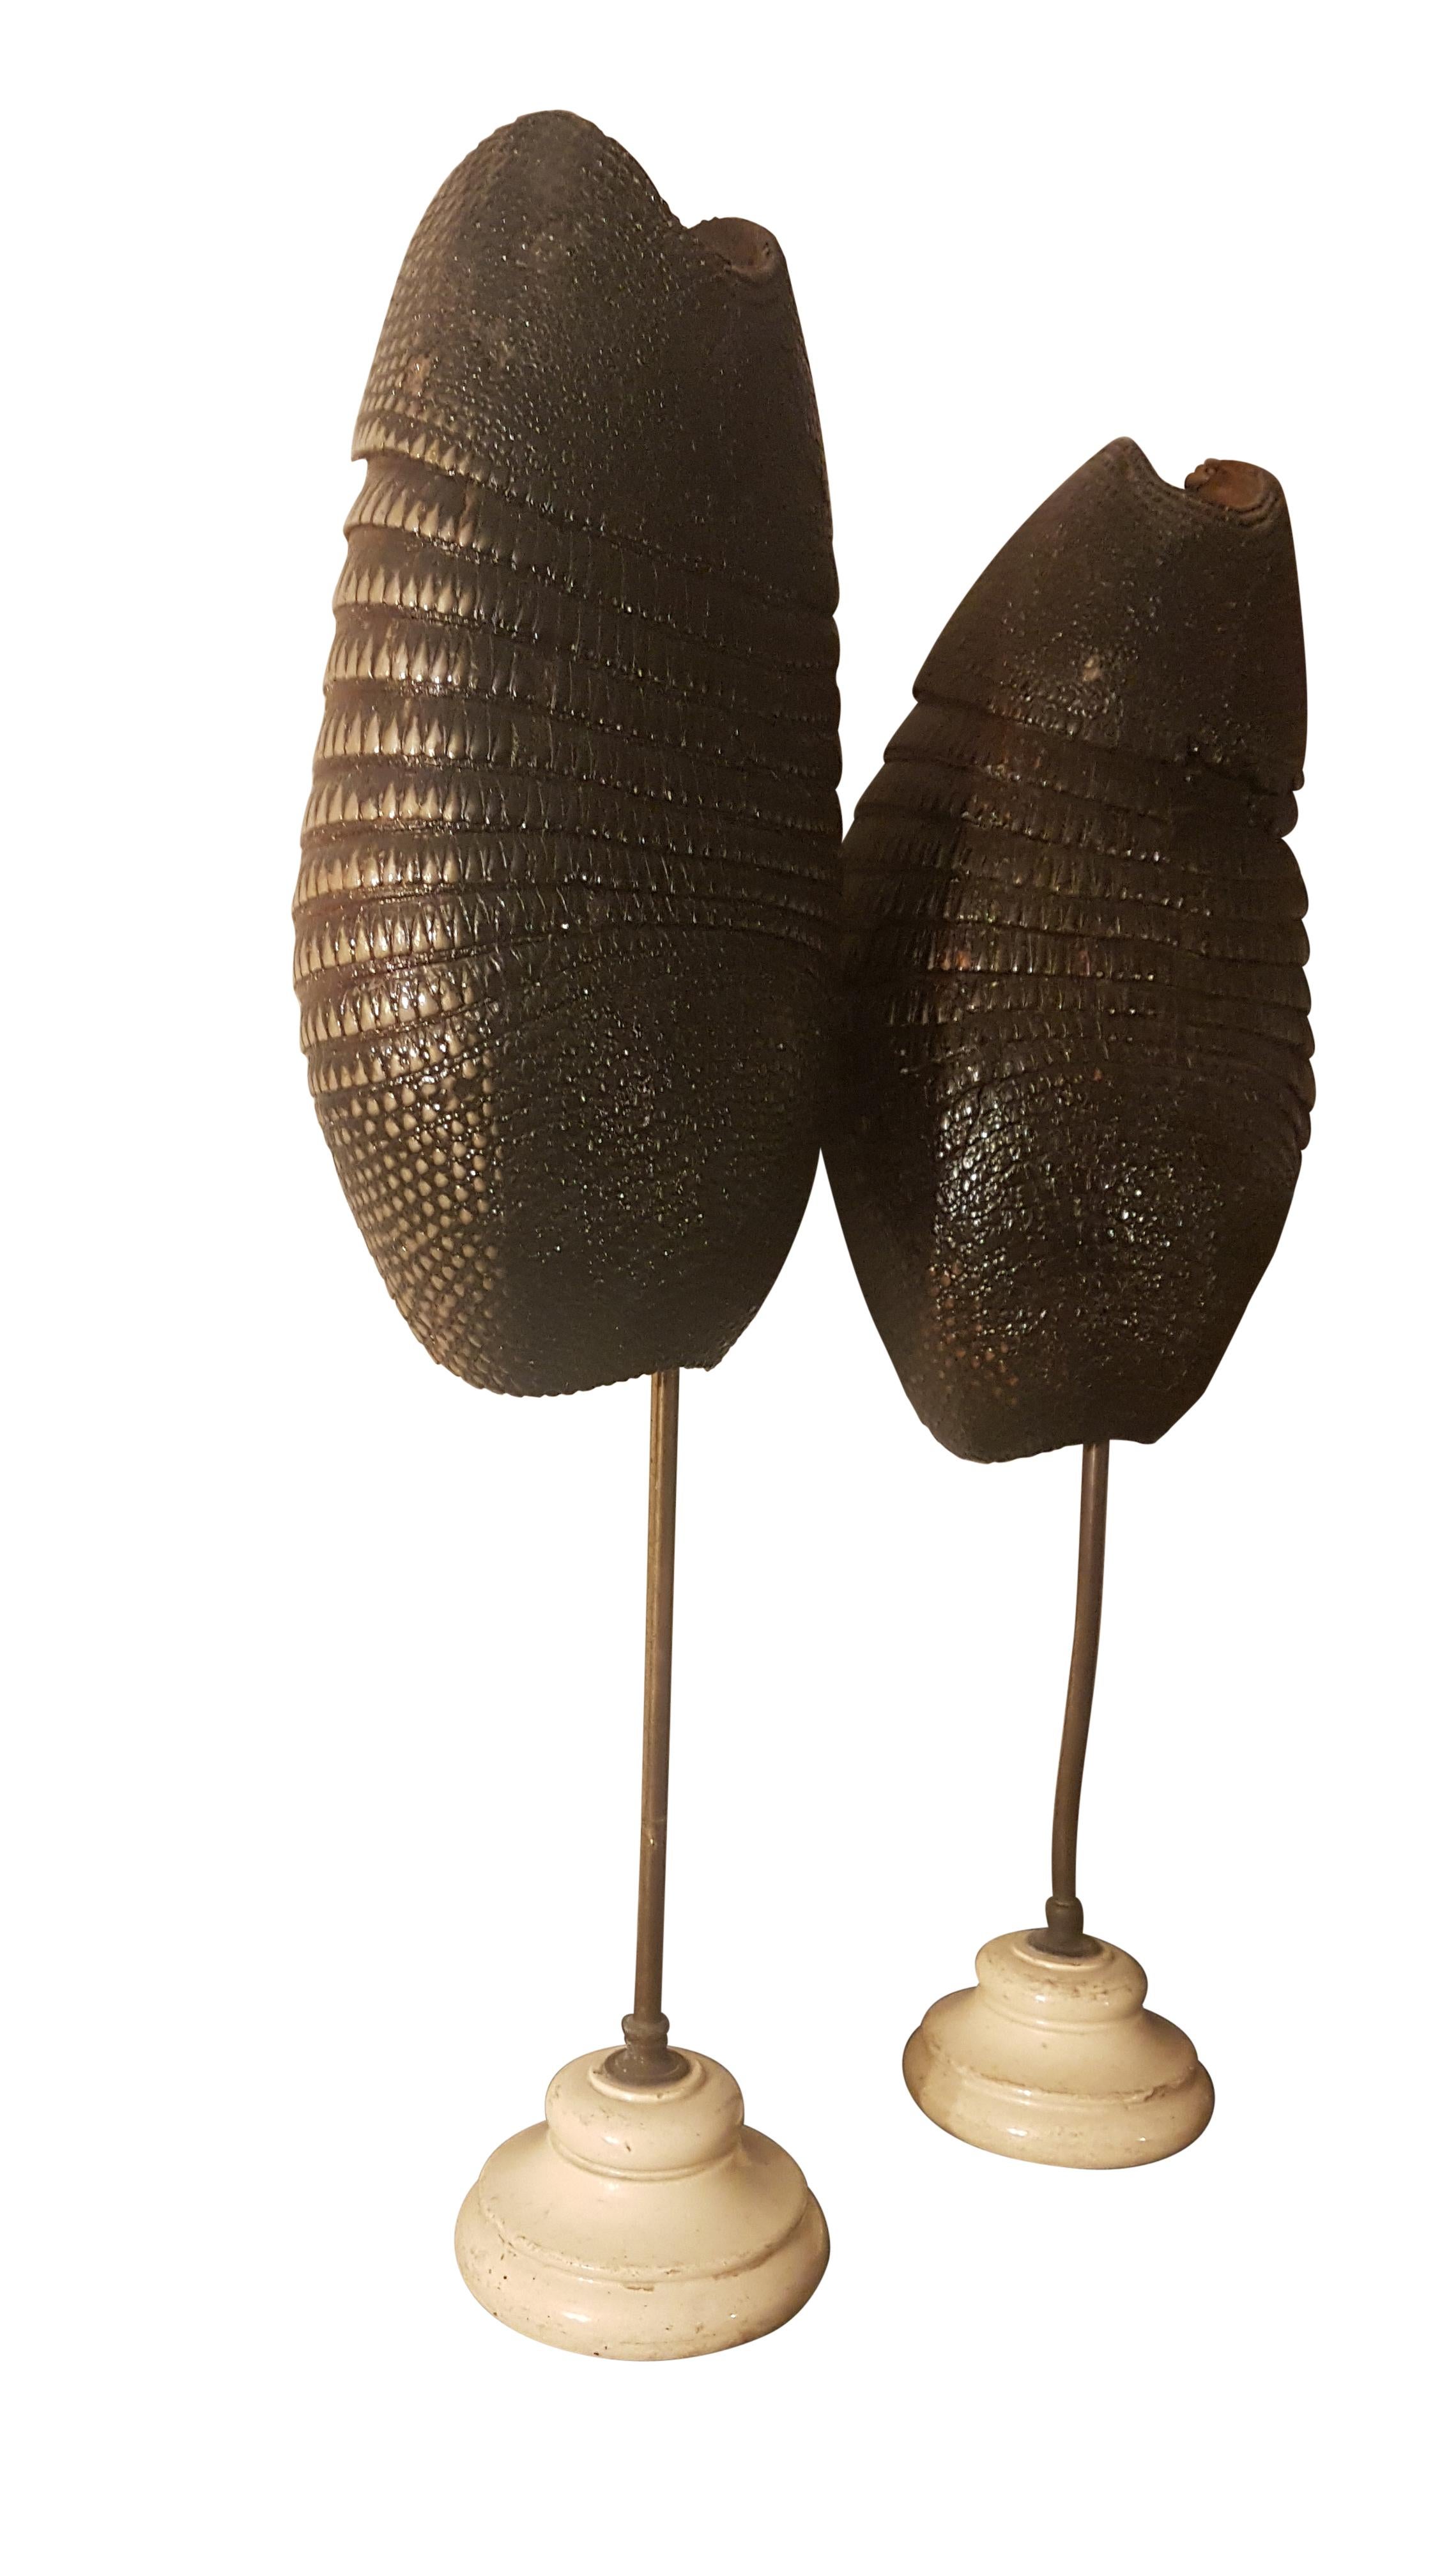 North American Pair of Late 19th Century Armadillo Shells on Stands